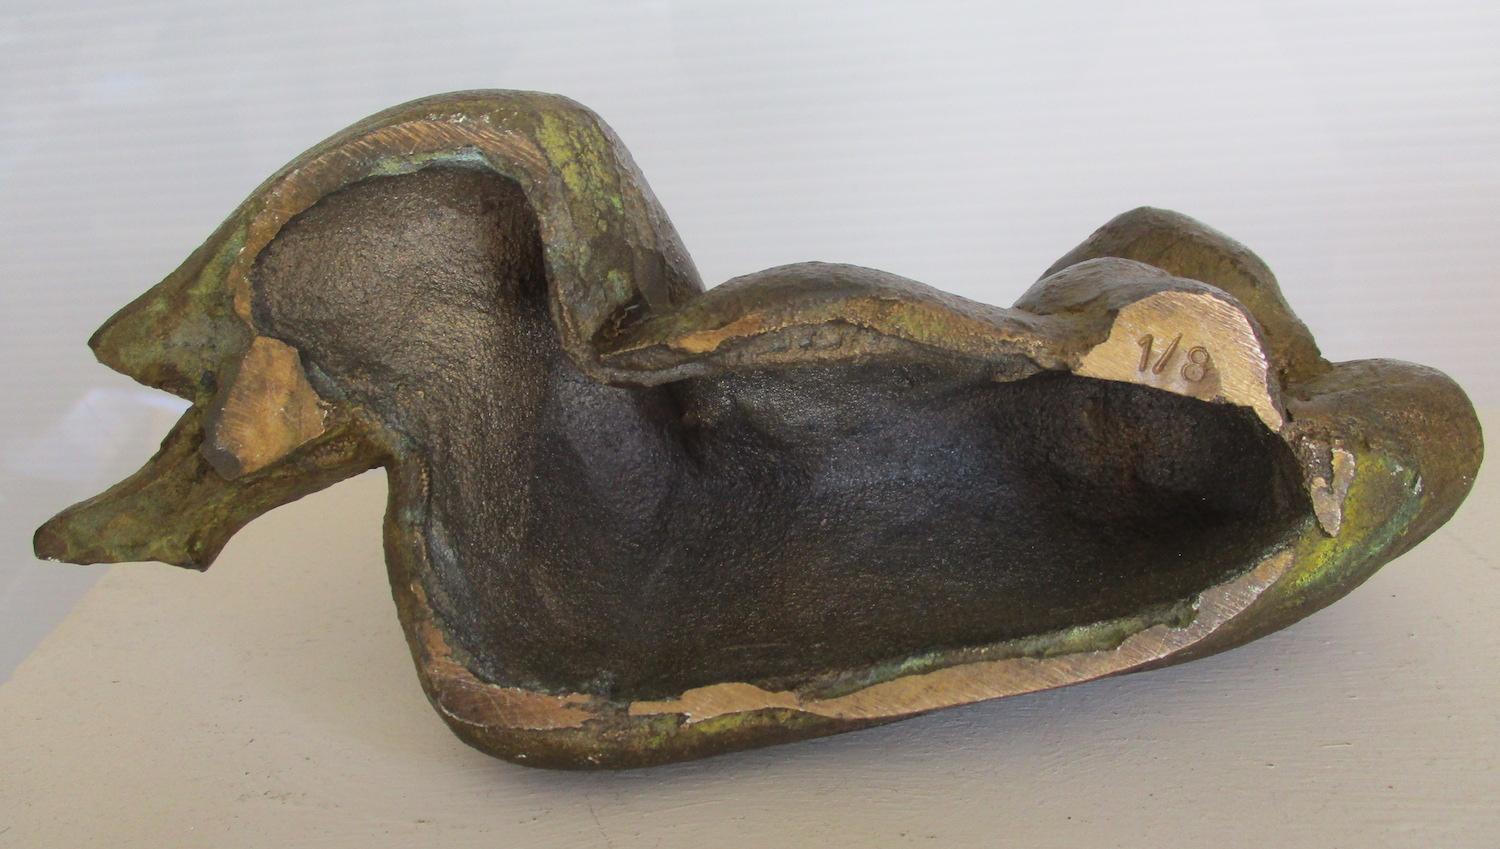 Superb modernist bronze.  Dating to the mid 20th Century, this voluptuous sleeping figure, in bronze with a fine nuanced green patina, is a monumental miniature. 
Reminiscent of the sculptures of Antoniucci Volti,  it is an original limited edition.